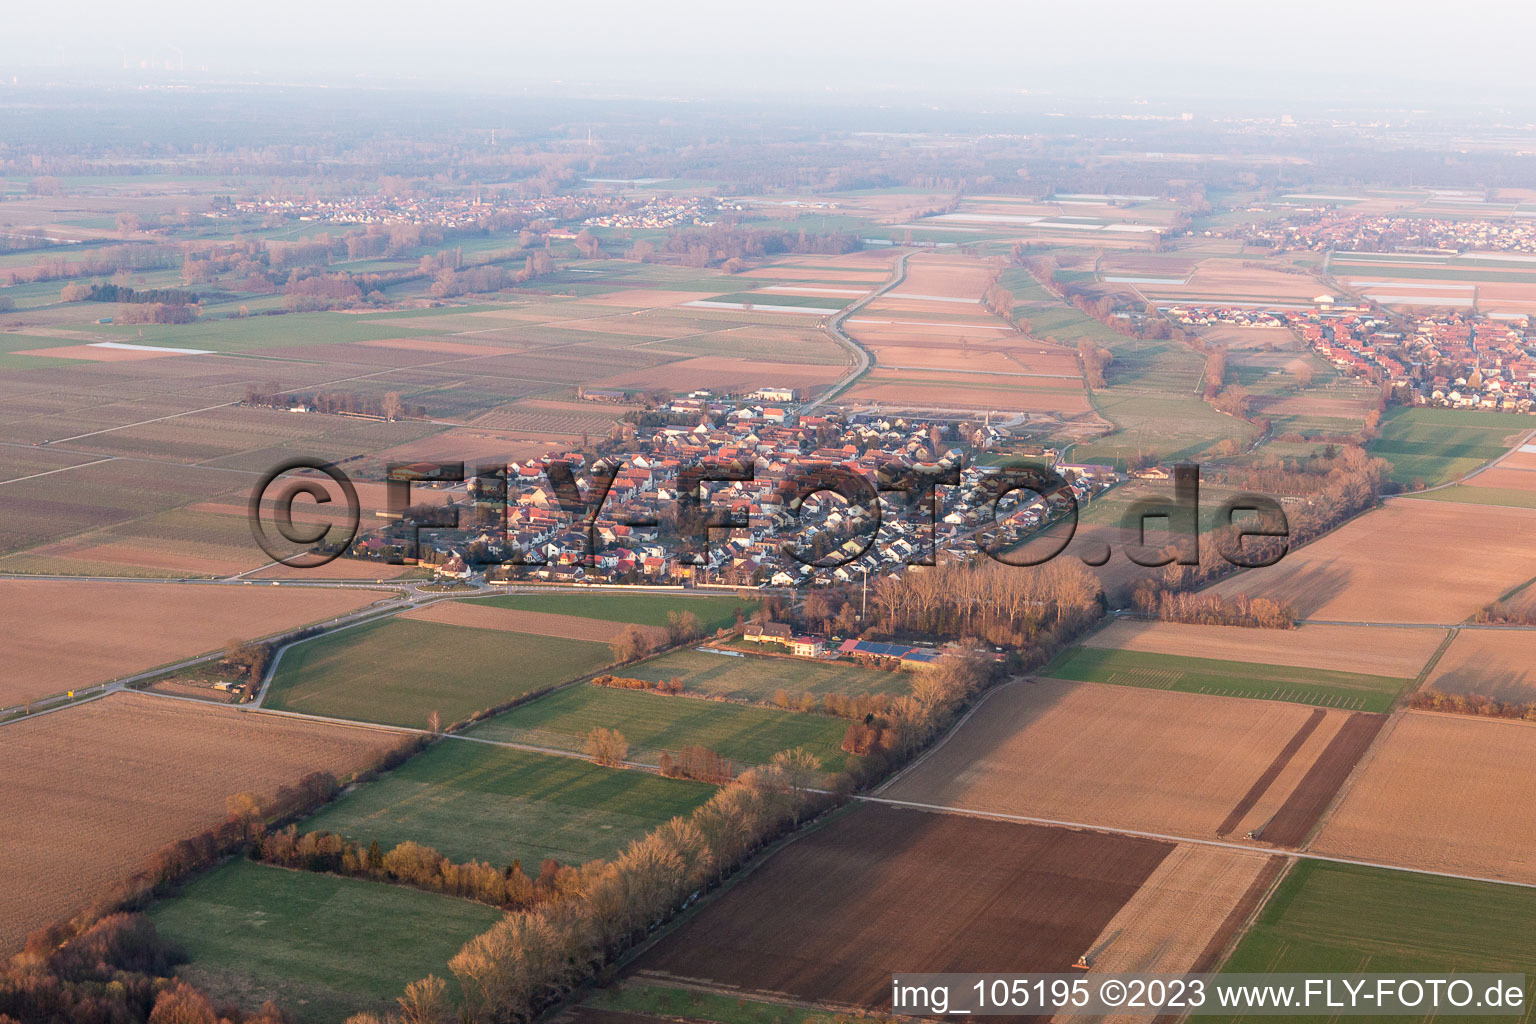 Venningen in the state Rhineland-Palatinate, Germany seen from a drone